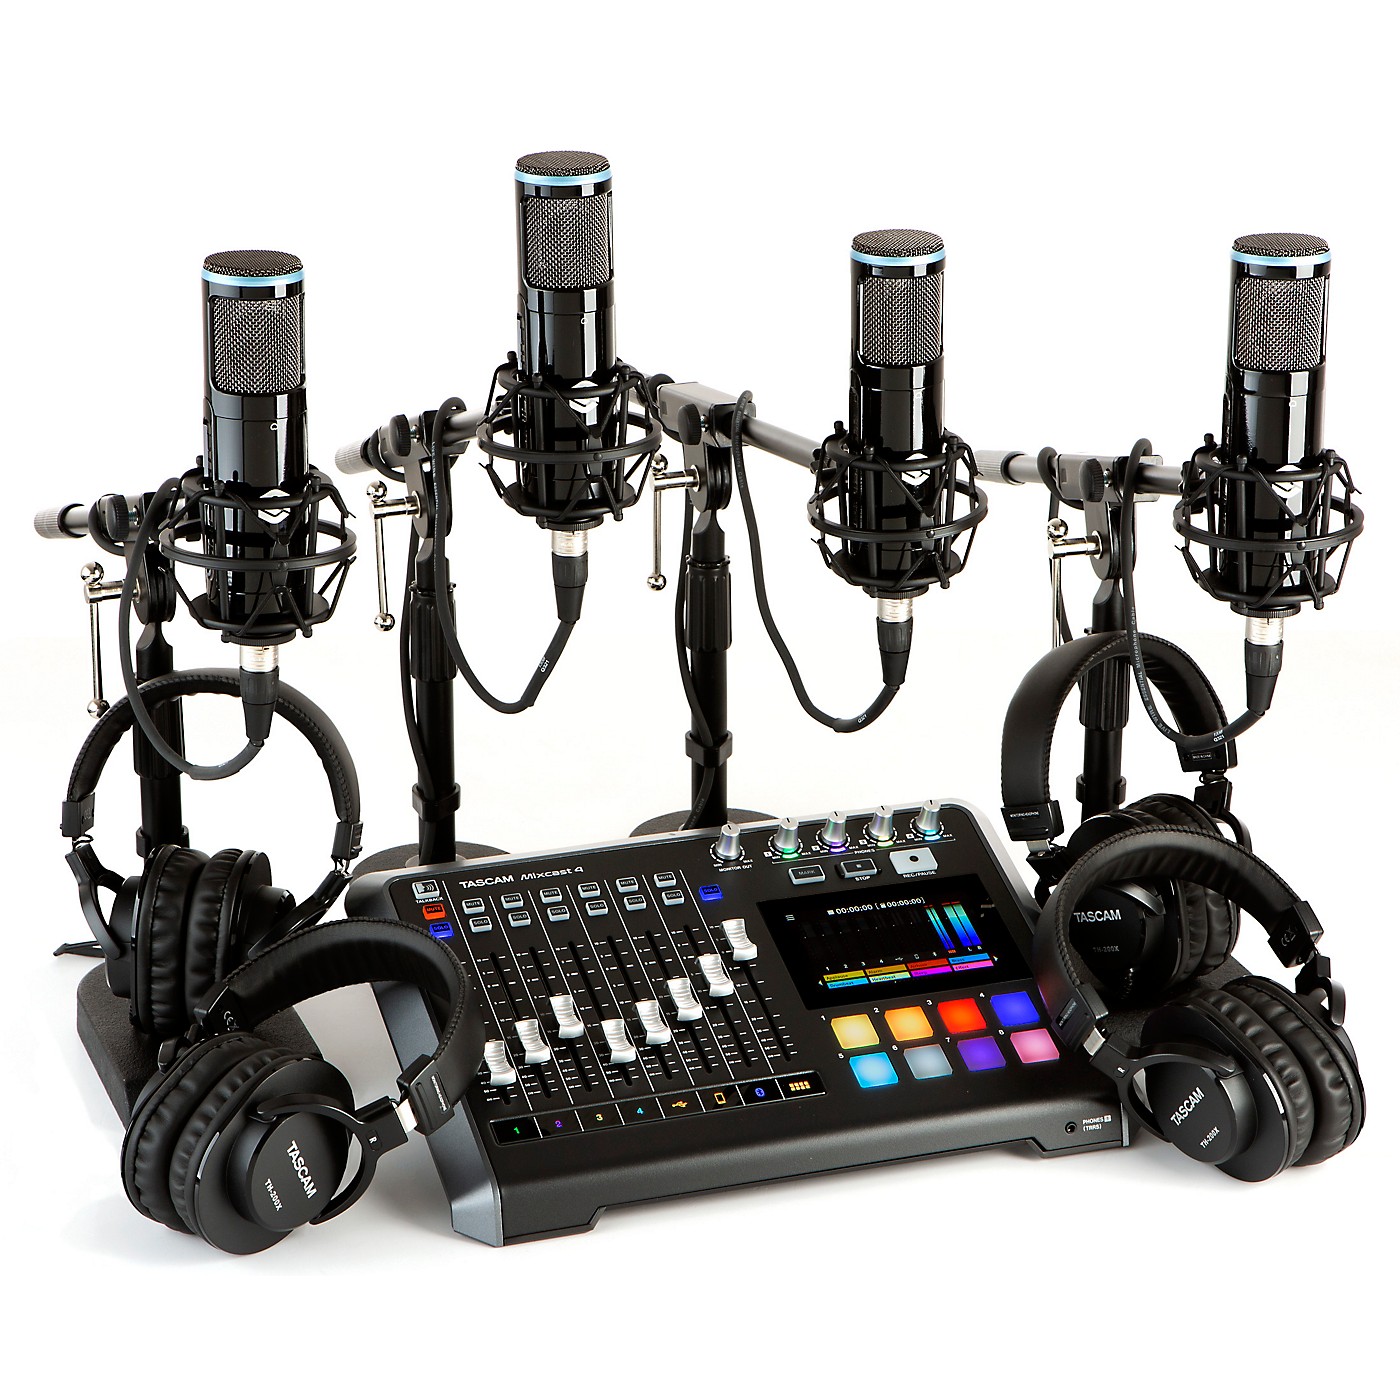 Tascam Mixcast 4 4-Person Podcasting Bundle With Sterling Audio SP150 Microphones and TH-200X Headphones thumbnail